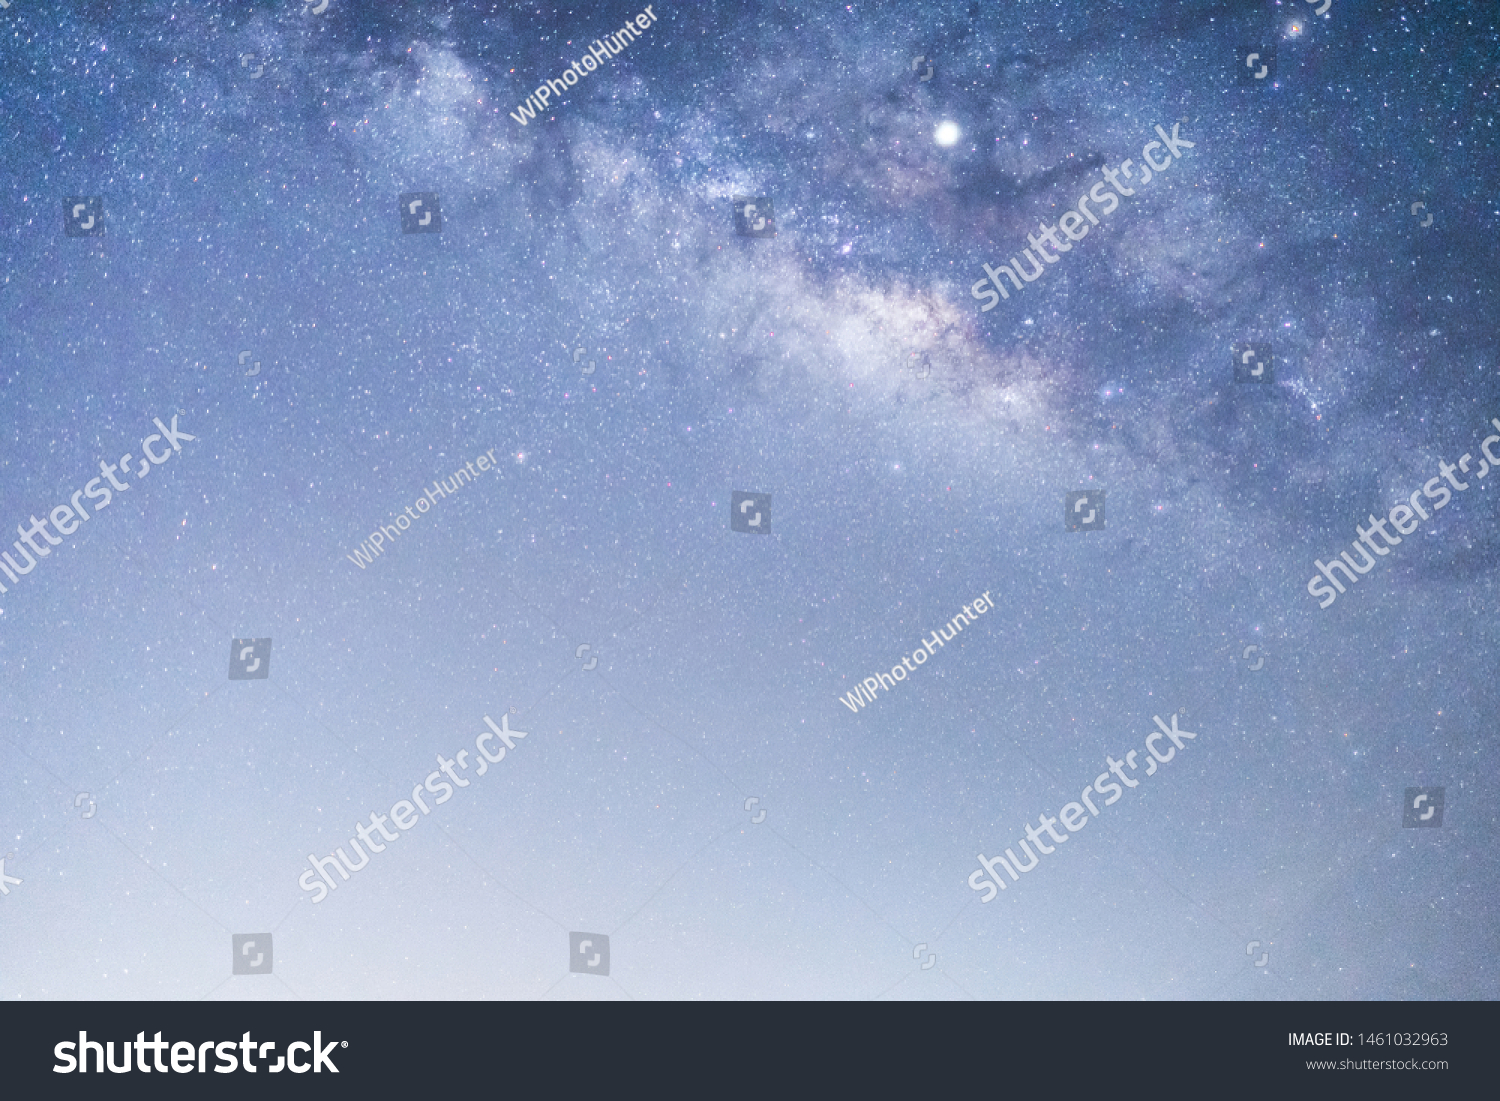 Panorama view of universe space shot of nebula and milky way galaxy with stars on blue night sky. Beautiful scene of Milky Way that contains our Solar System under amazing starry night sky. purple #1461032963